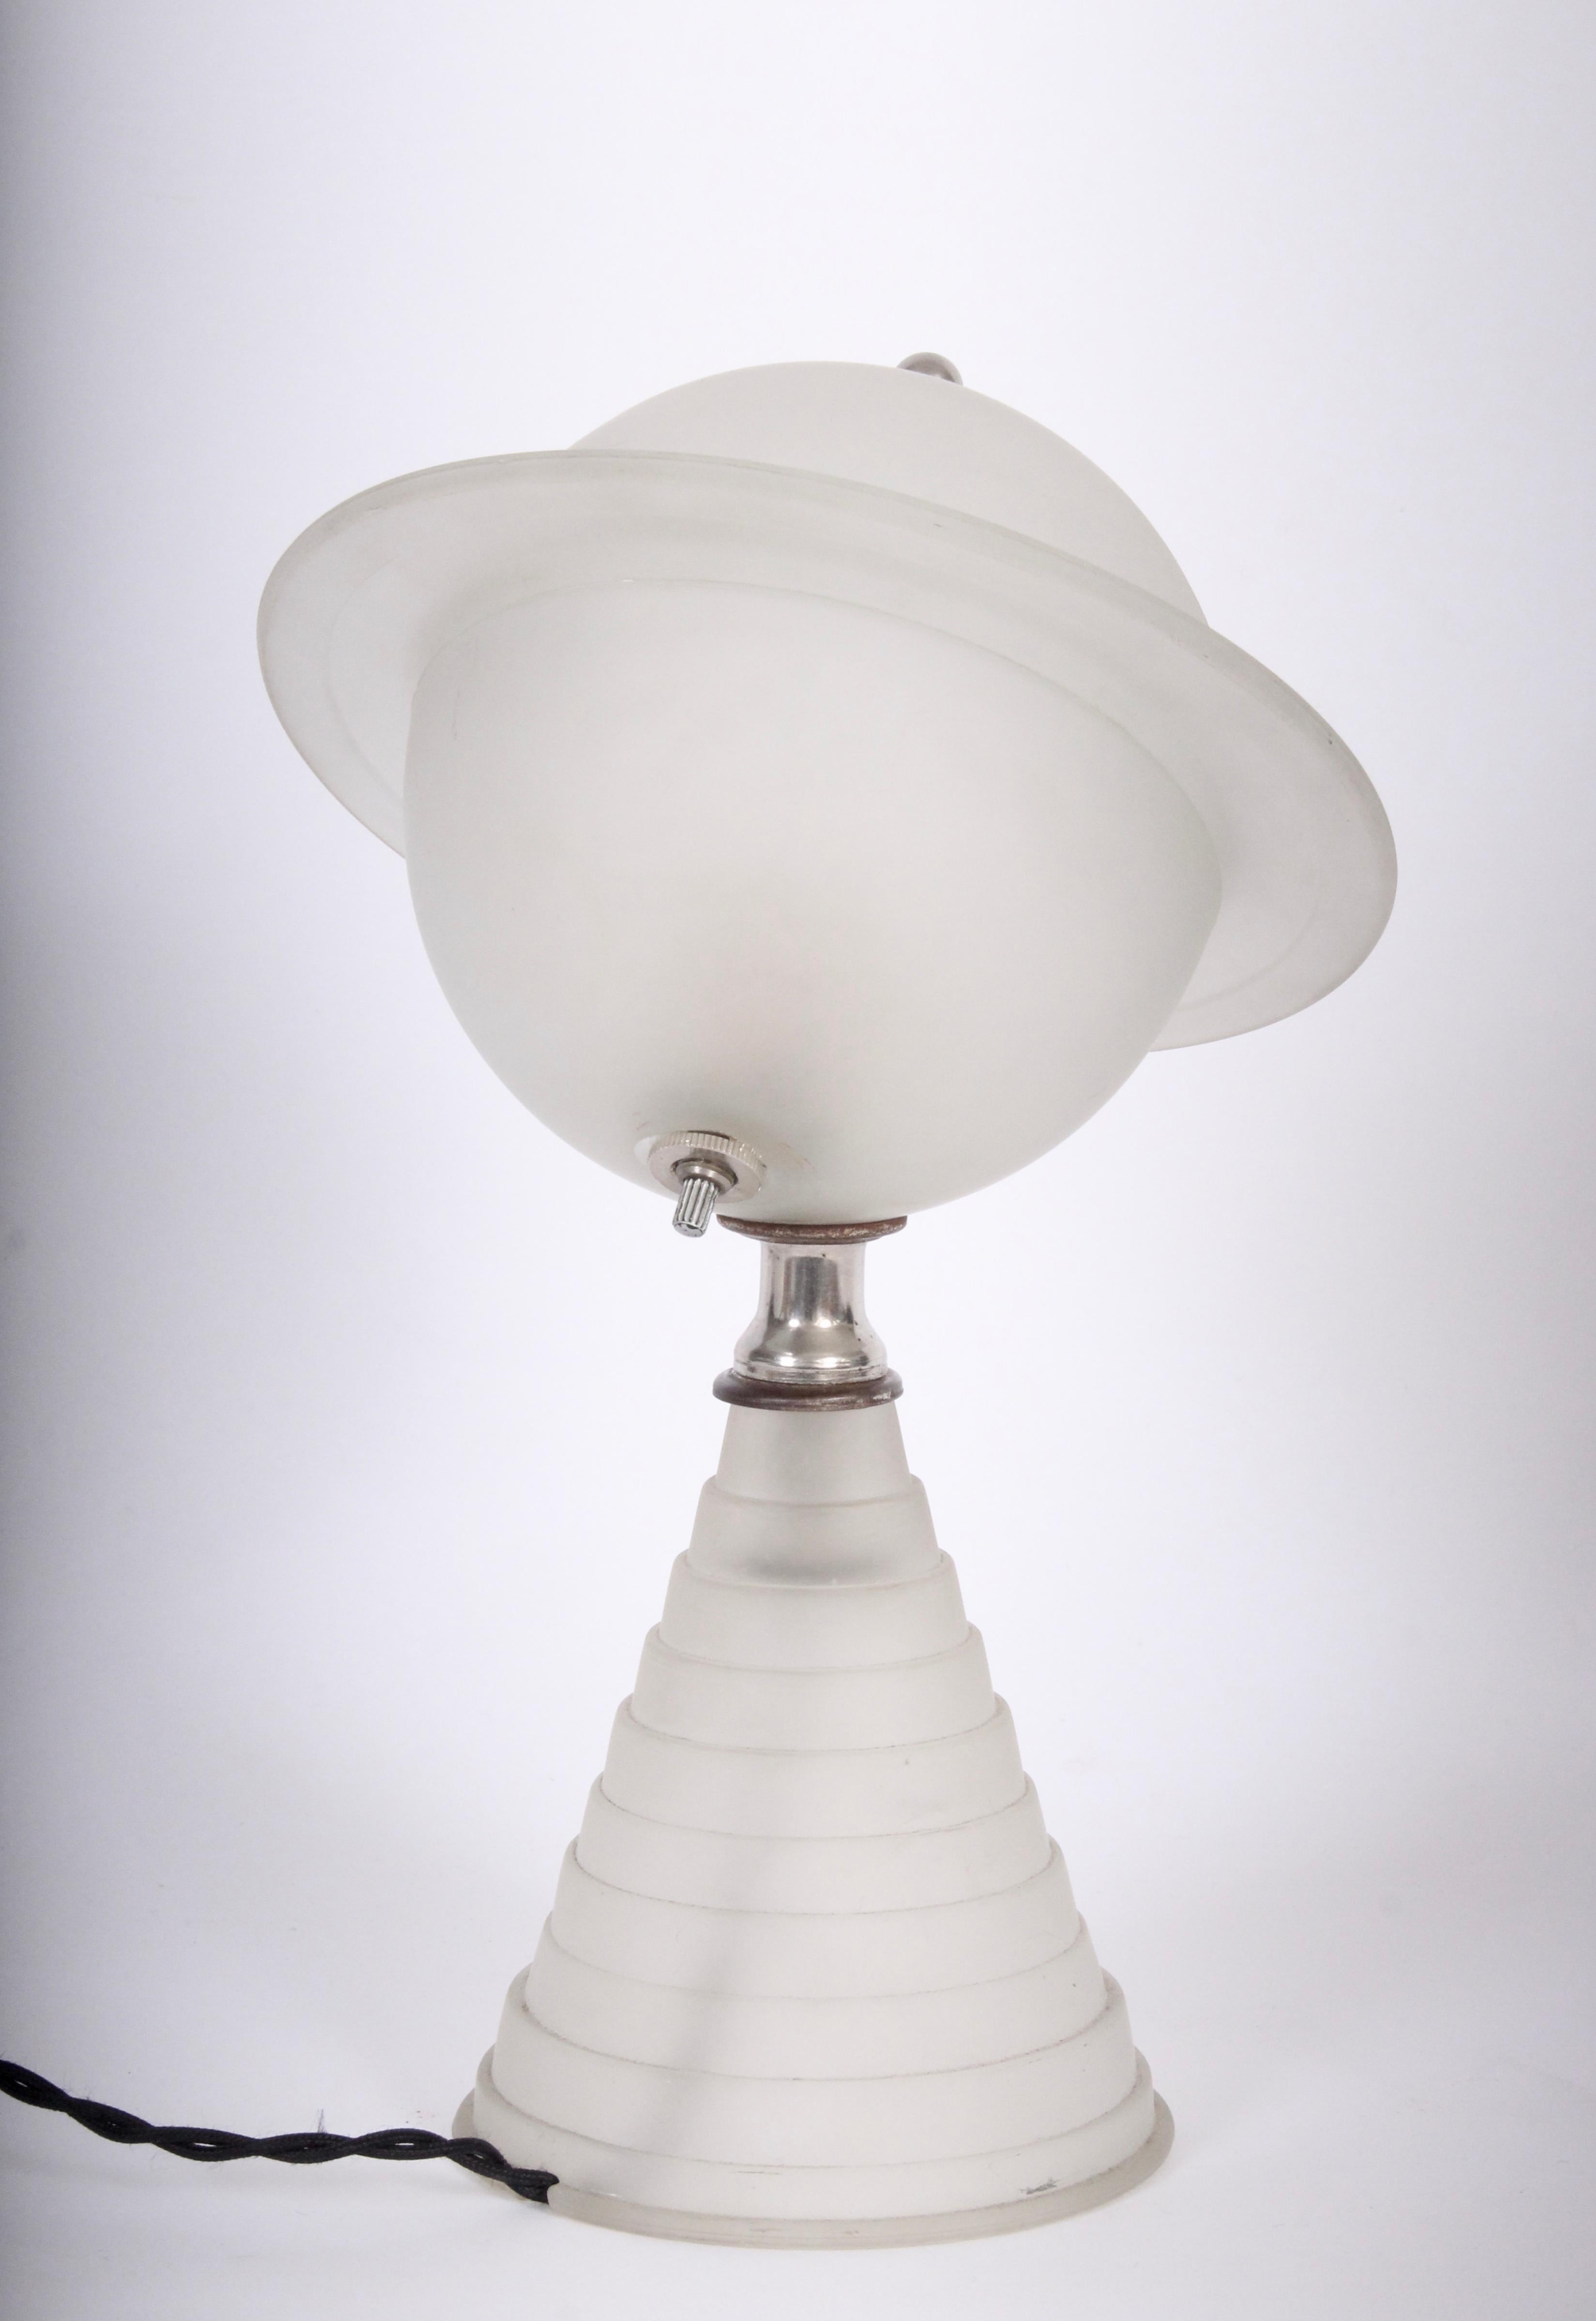 New York World's Fair White Planetary Lamp produced by Houze Glass Company. 4.5D step base. With Nickel-plated hardware. Standard socket, utilizes smaller standard socket bulb. Original condition. Art Deco. Rarity. Authenticated by The Houze Glass